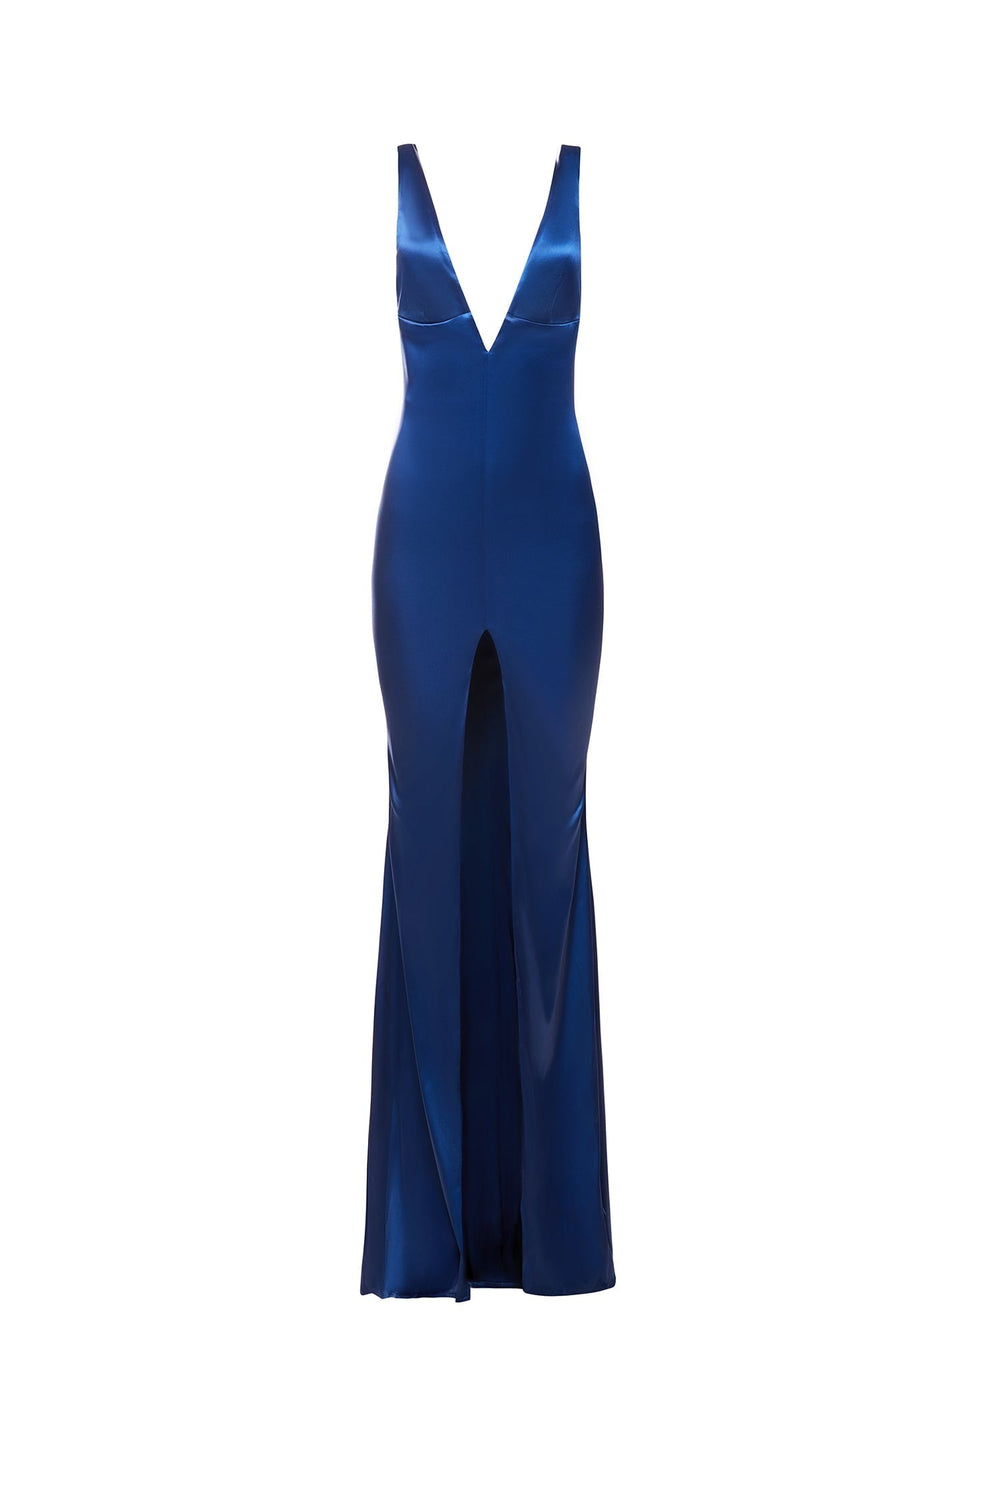 Ambel - Navy Satin Gown with Plunging Neckline and Front Slit